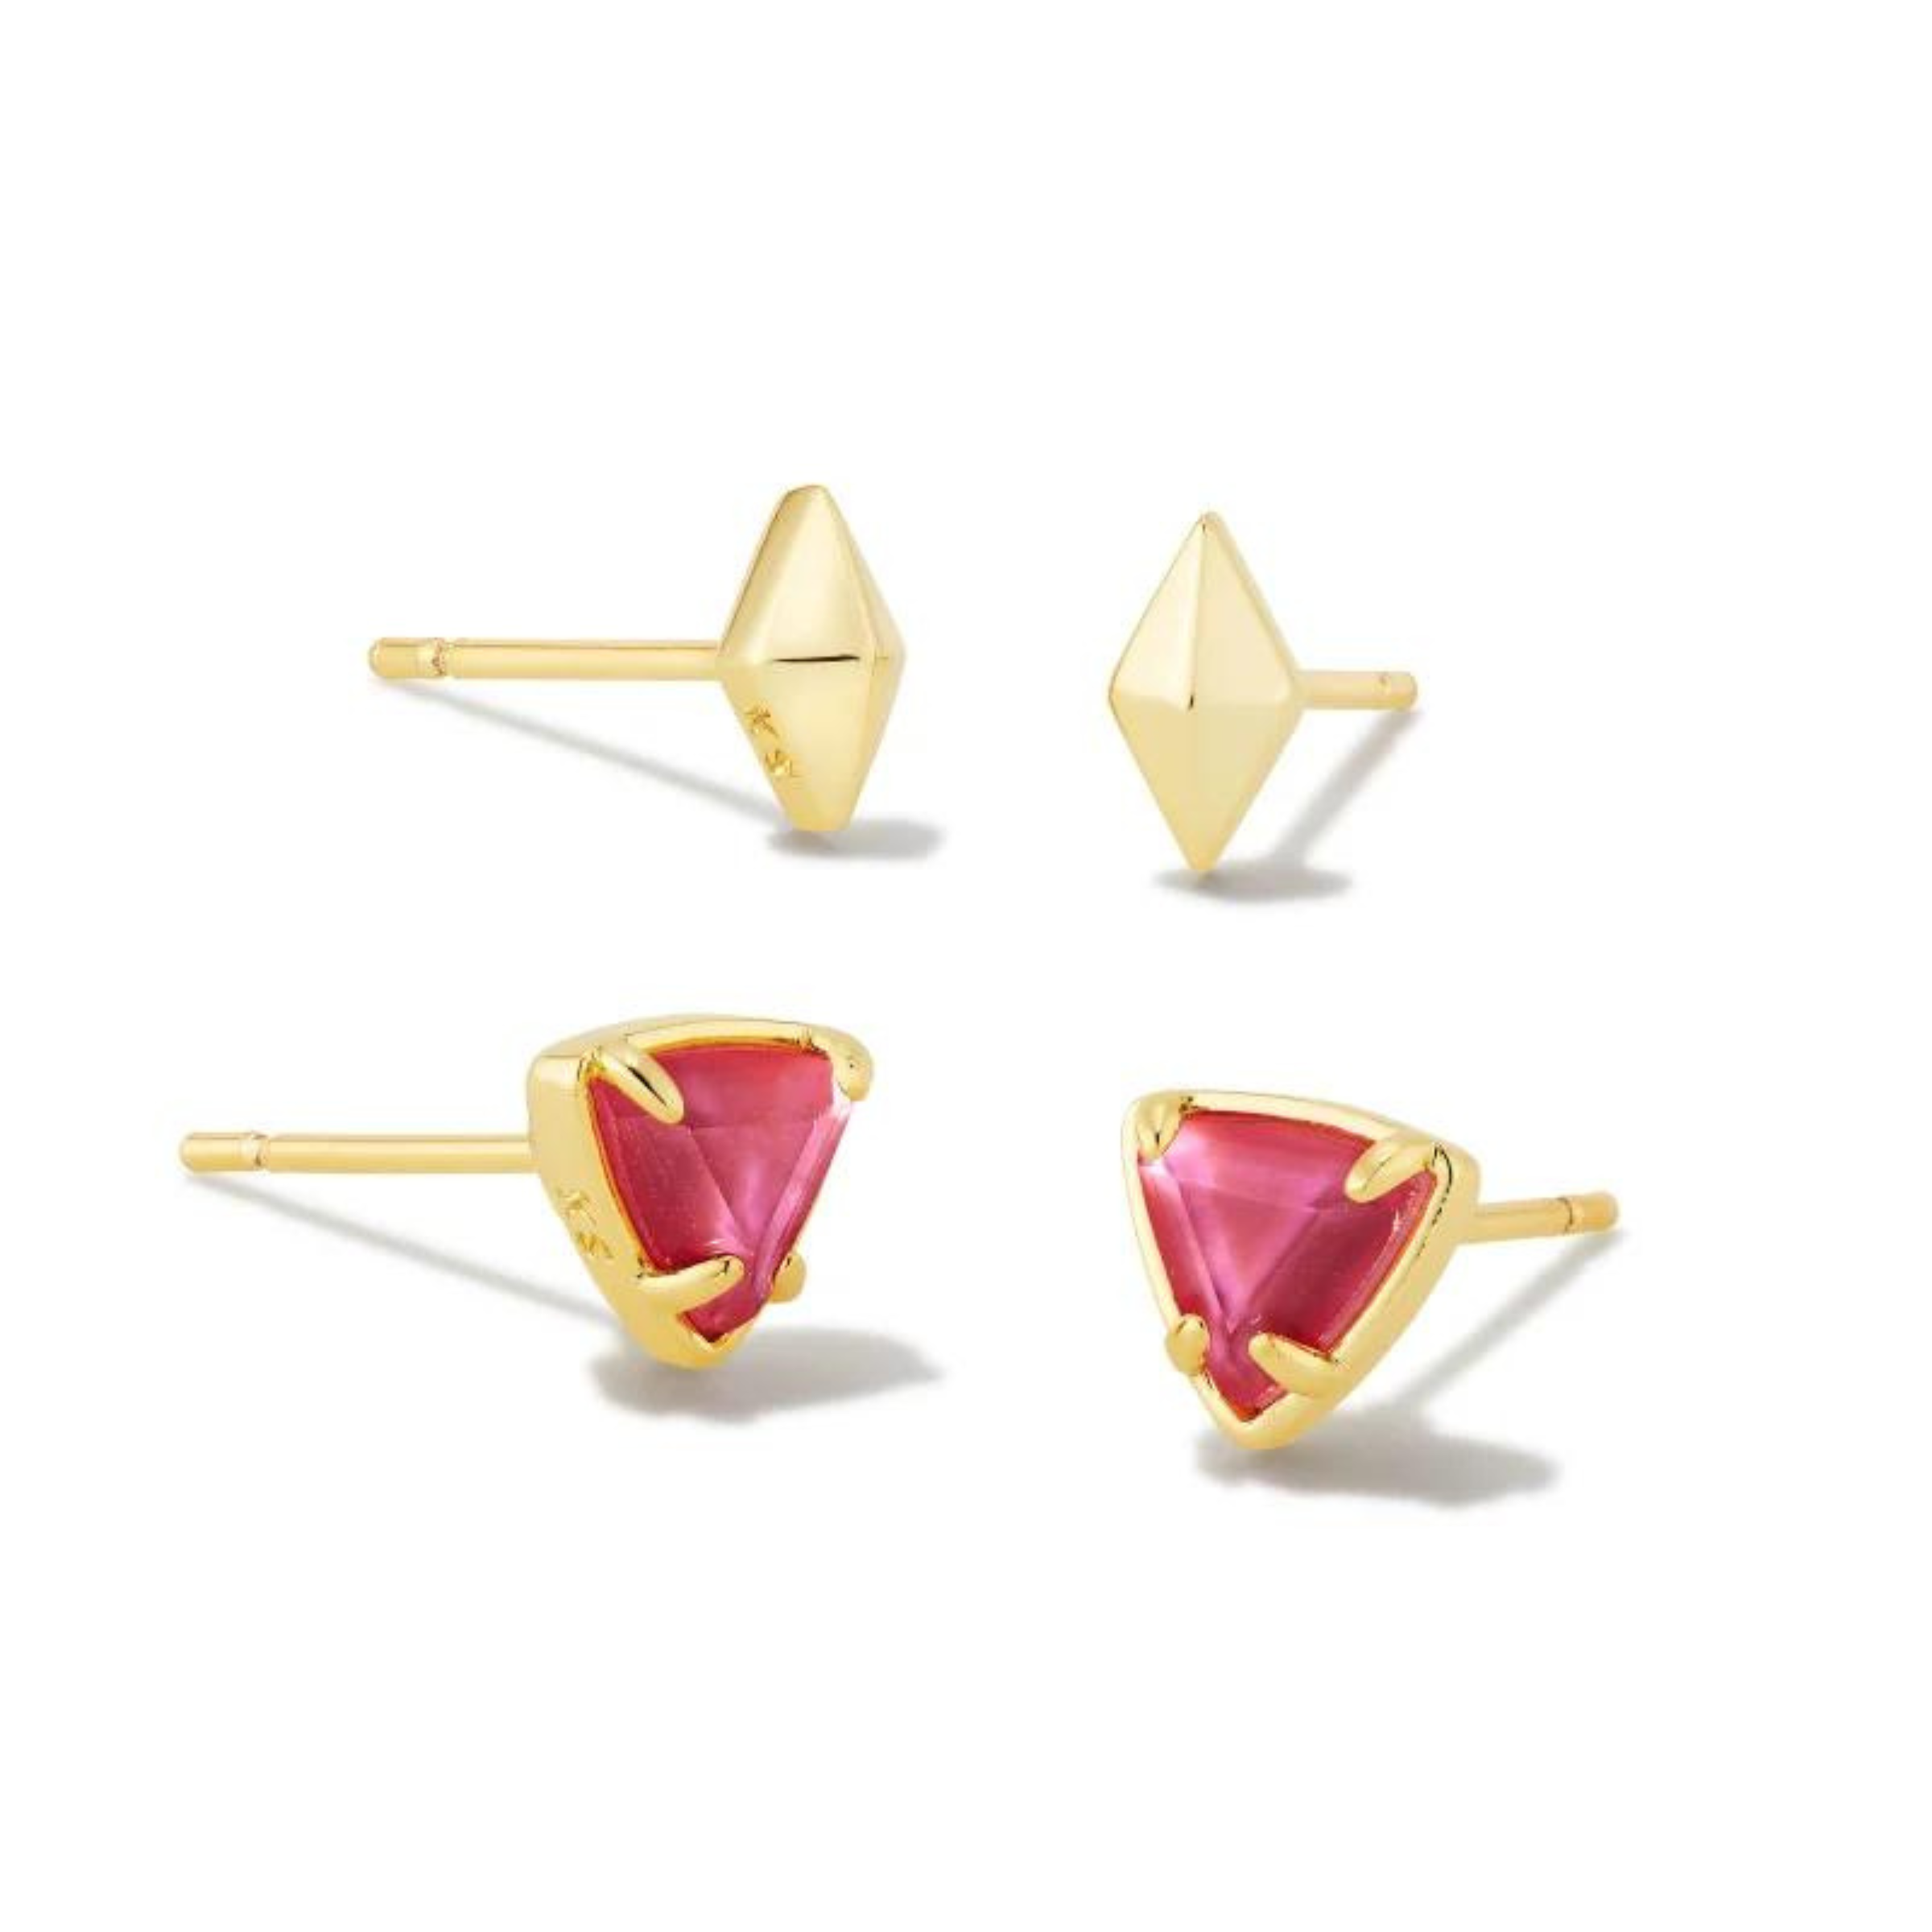 Pictured on a white background are a set of two stud earrings with gold ear posts. The top pair has a gold, diamond shaped stud. The bottom pair are gold triangle studs with magenta centers. 